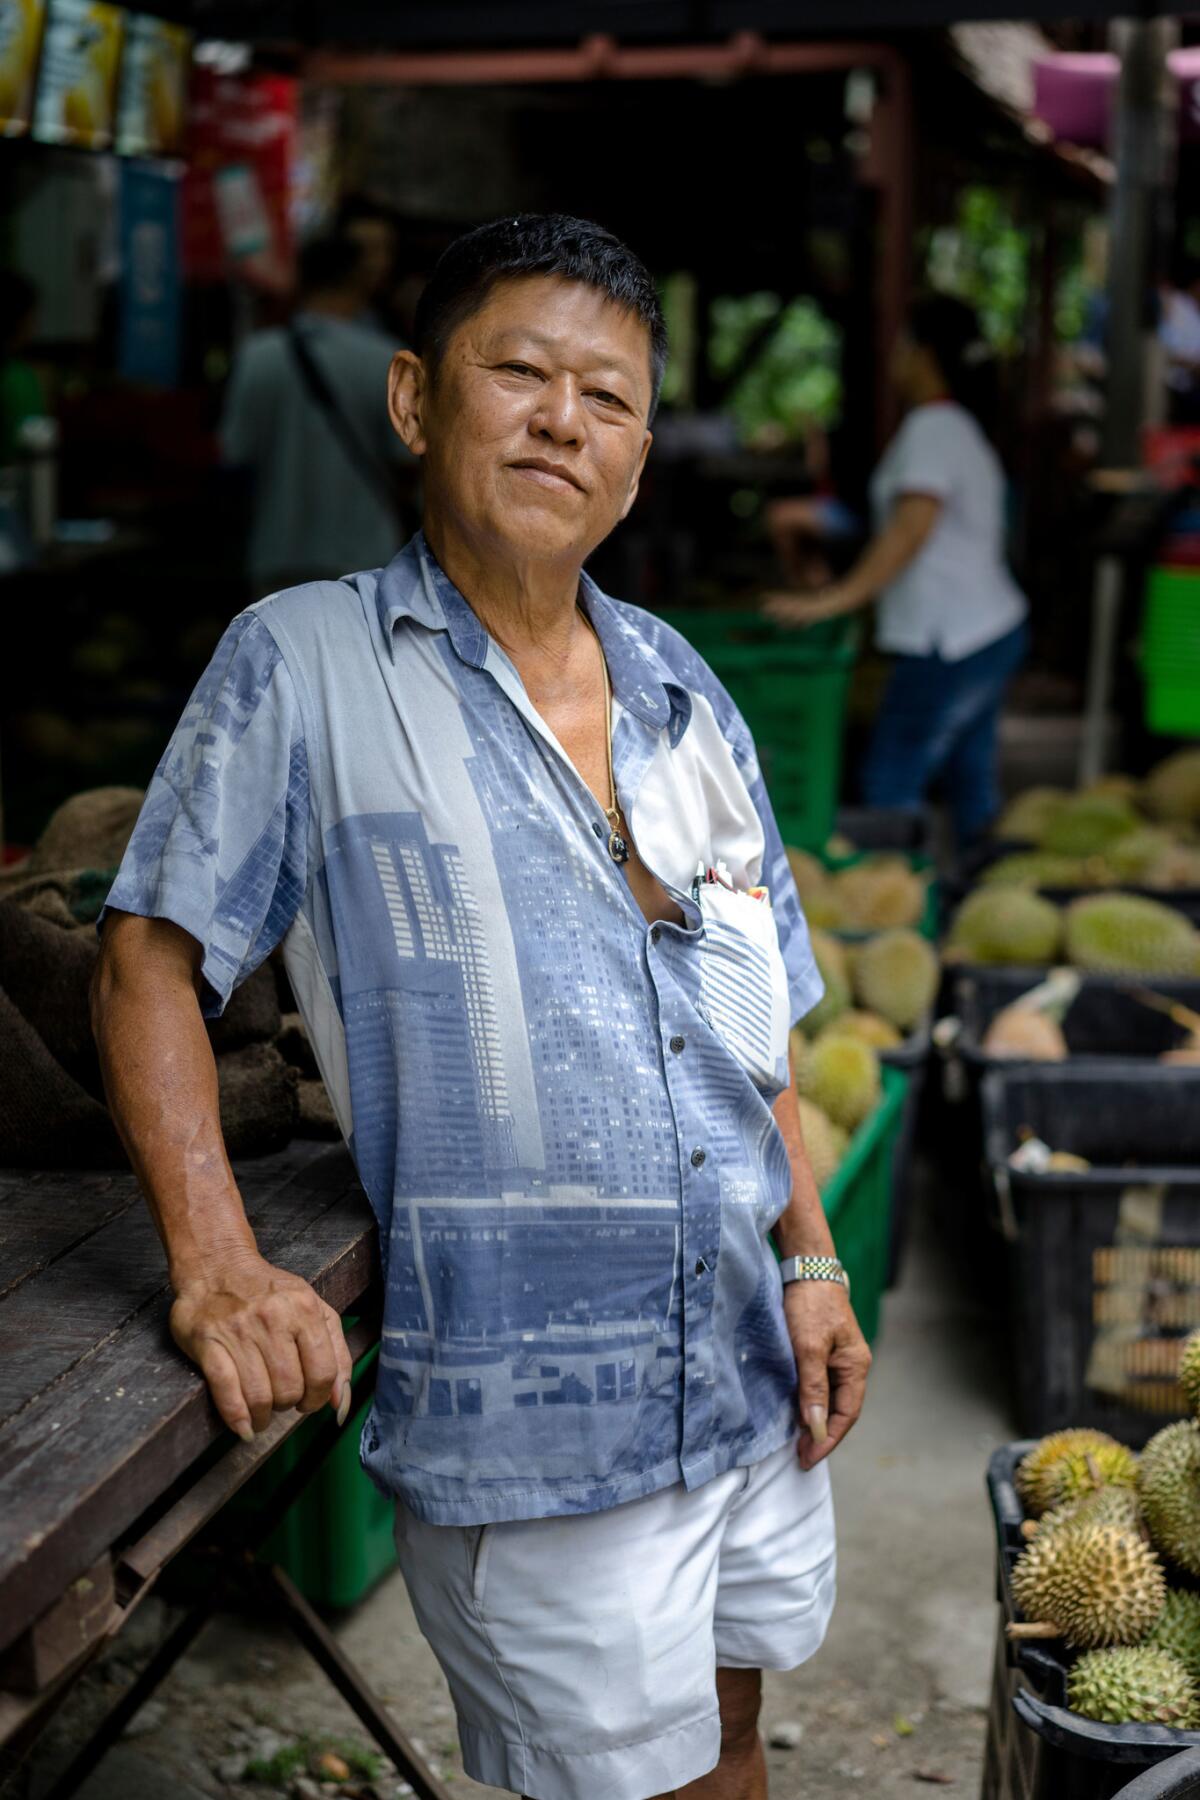 Tan Eow Chong at Durian Kaki, his roadside durian stall, in Bayan Lepas, Malaysia. (Suzanne Lee / For The Times)